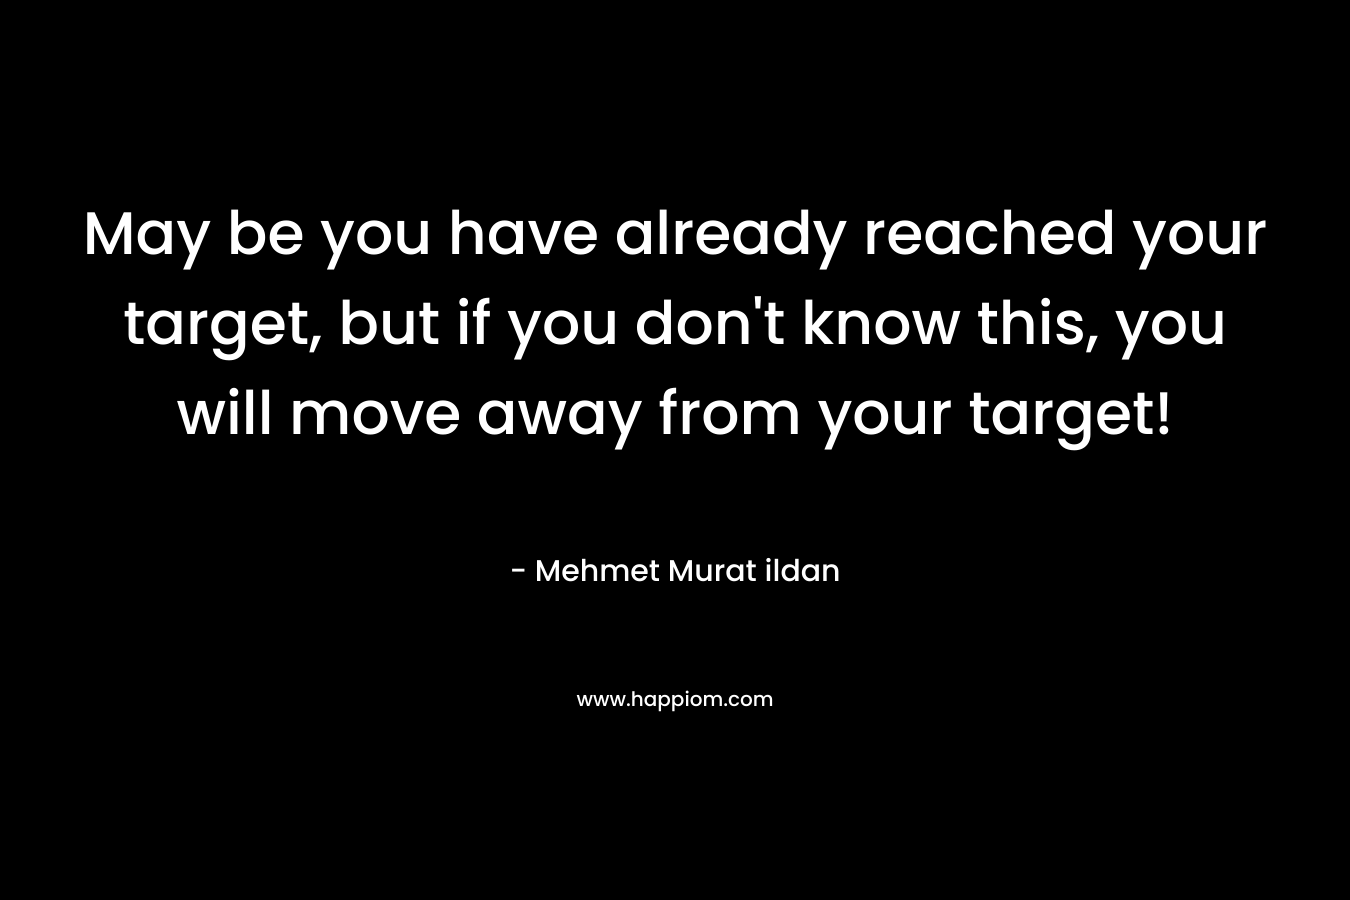 May be you have already reached your target, but if you don’t know this, you will move away from your target! – Mehmet Murat ildan